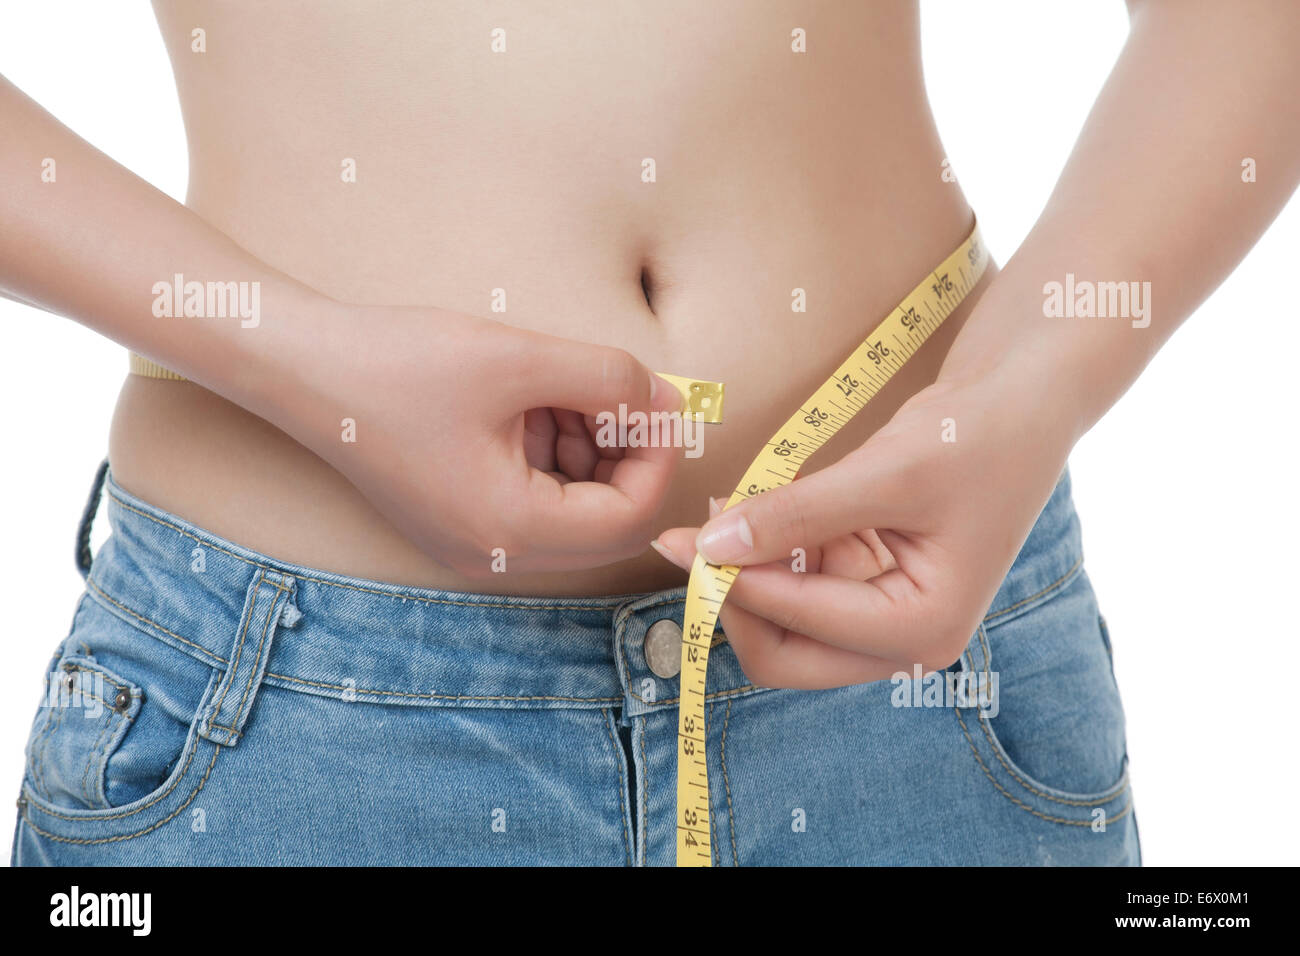 https://c8.alamy.com/comp/E6X0M1/a-very-fit-asian-woman-measuring-her-waist-isolated-on-a-white-background-E6X0M1.jpg